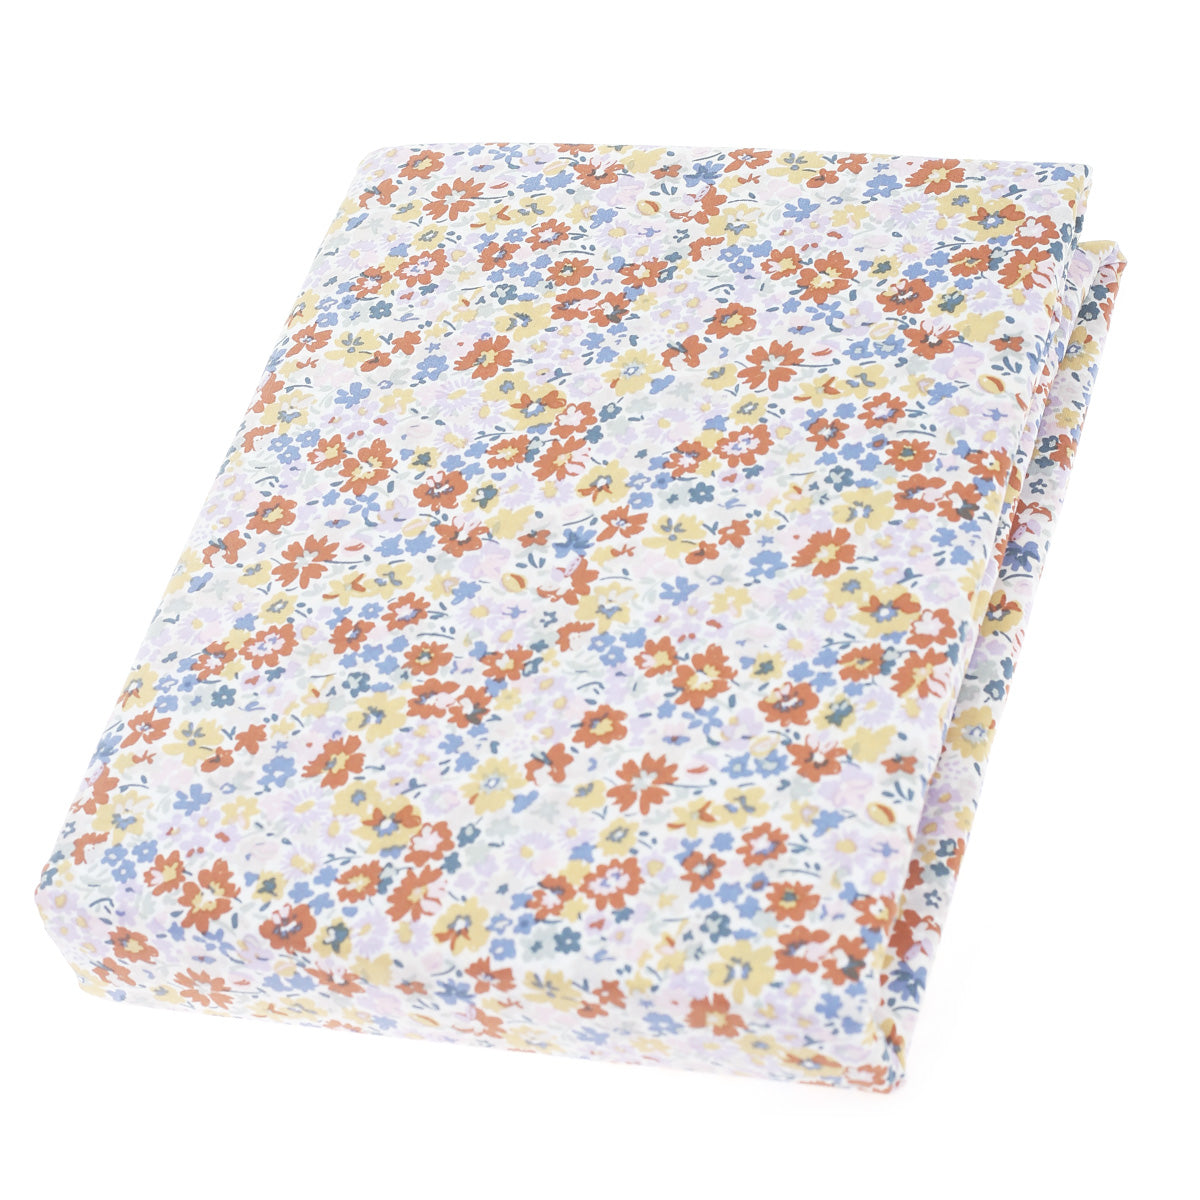 Pink & Lavender Floral Double Bed Sheet 96x102"